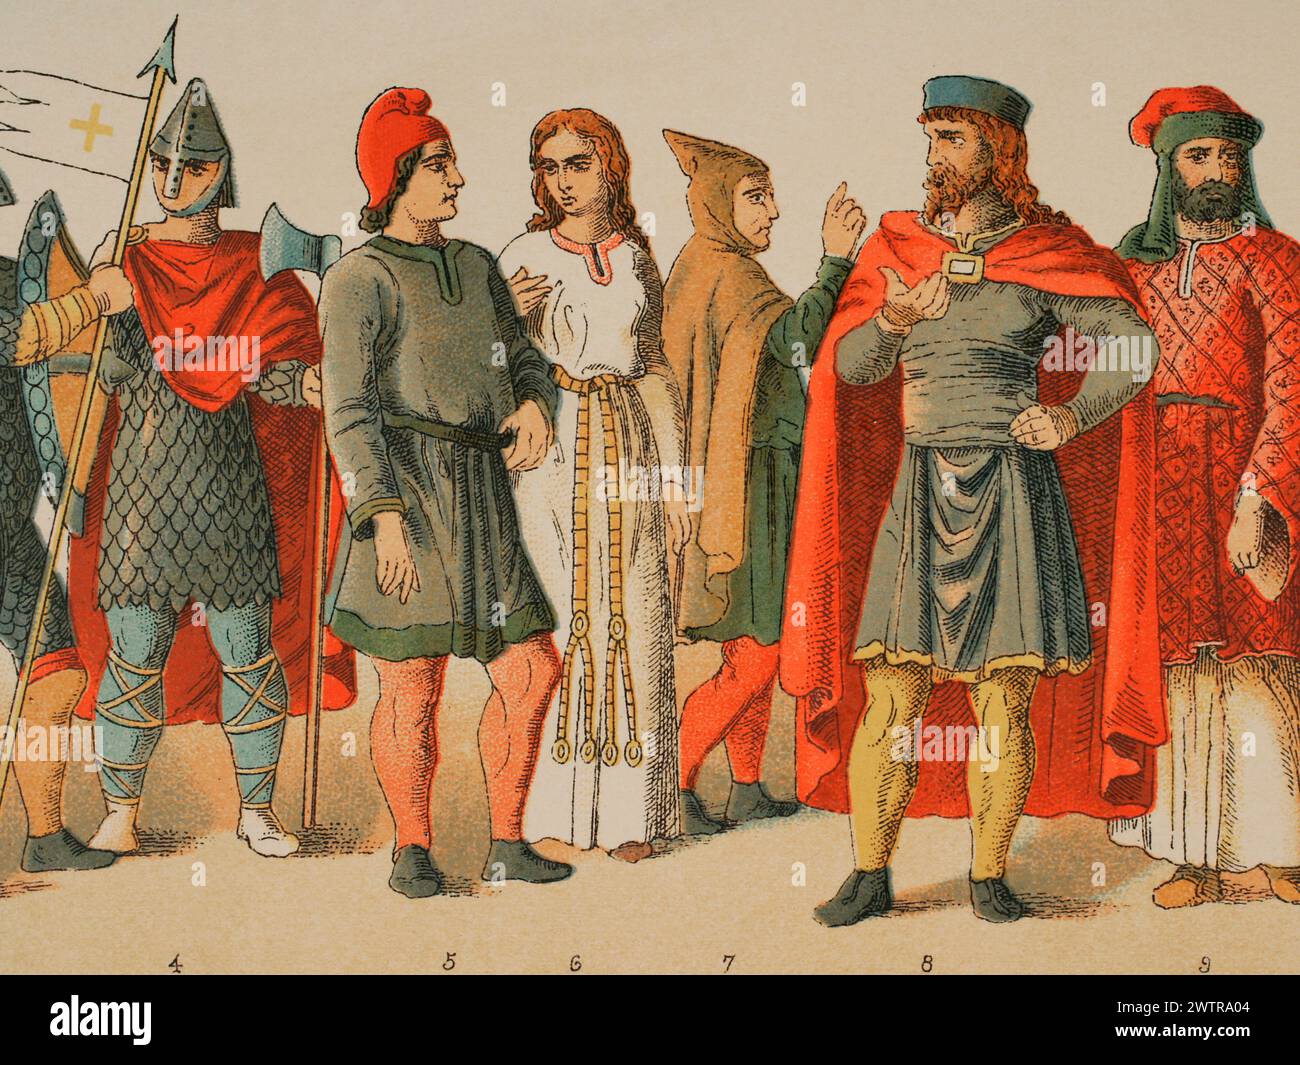 History of France, 1000. From left to right, 4: warrior, 5-6-7: ordinary people, 8-9: noblemen. Chromolithography. 'Historia Universal', by César Cantú. Volume V, 1884. Stock Photo